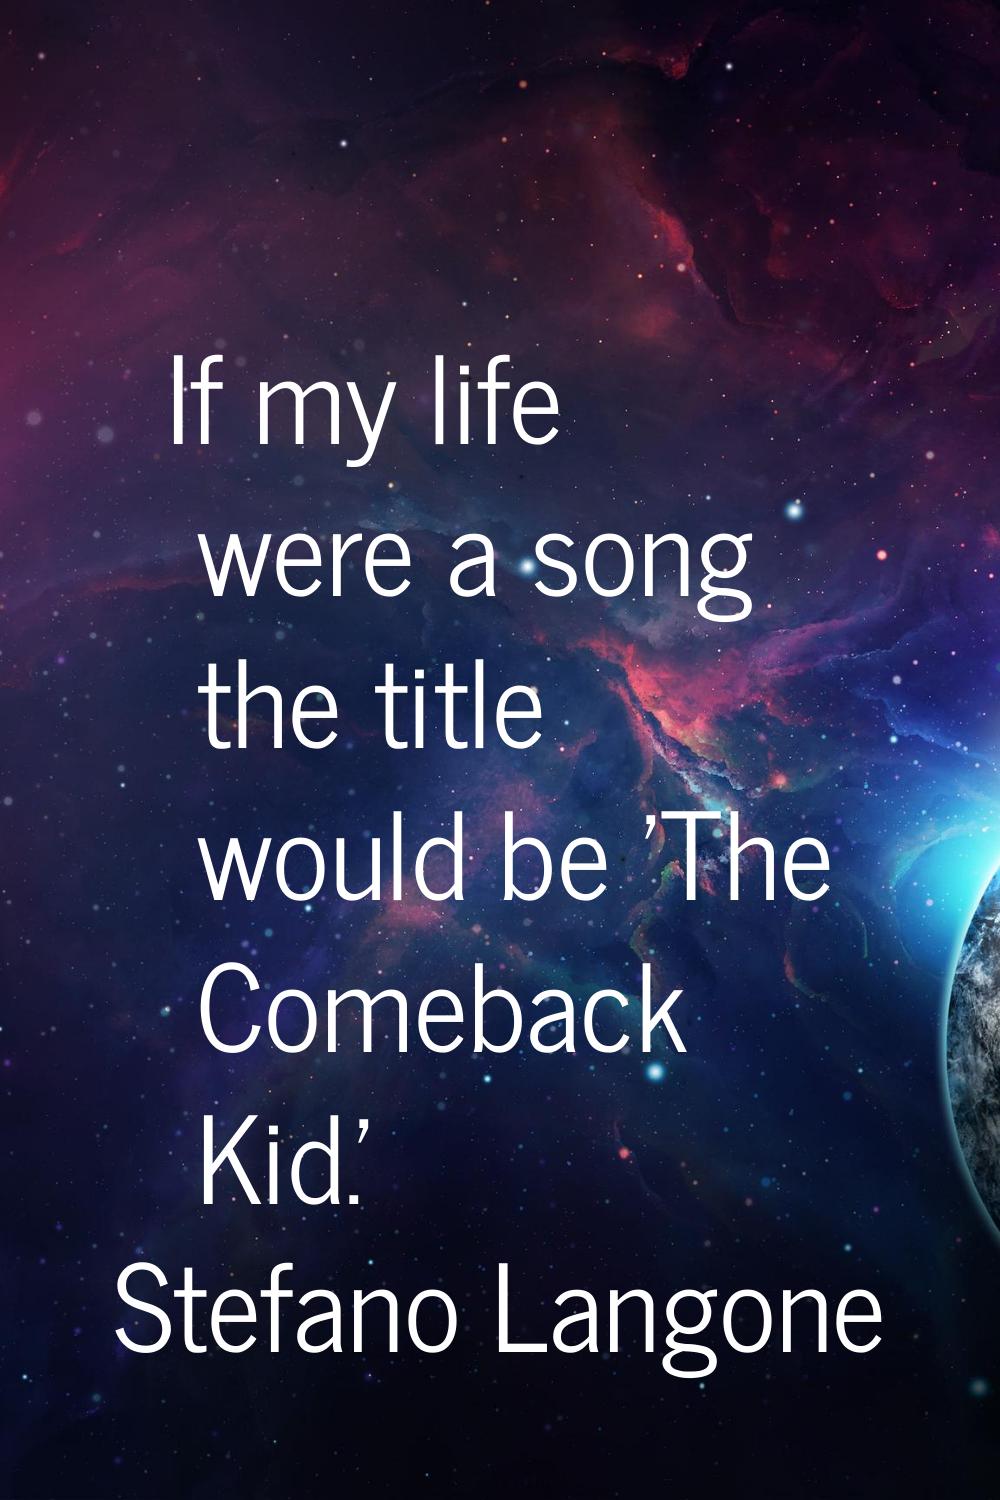 If my life were a song the title would be 'The Comeback Kid.'